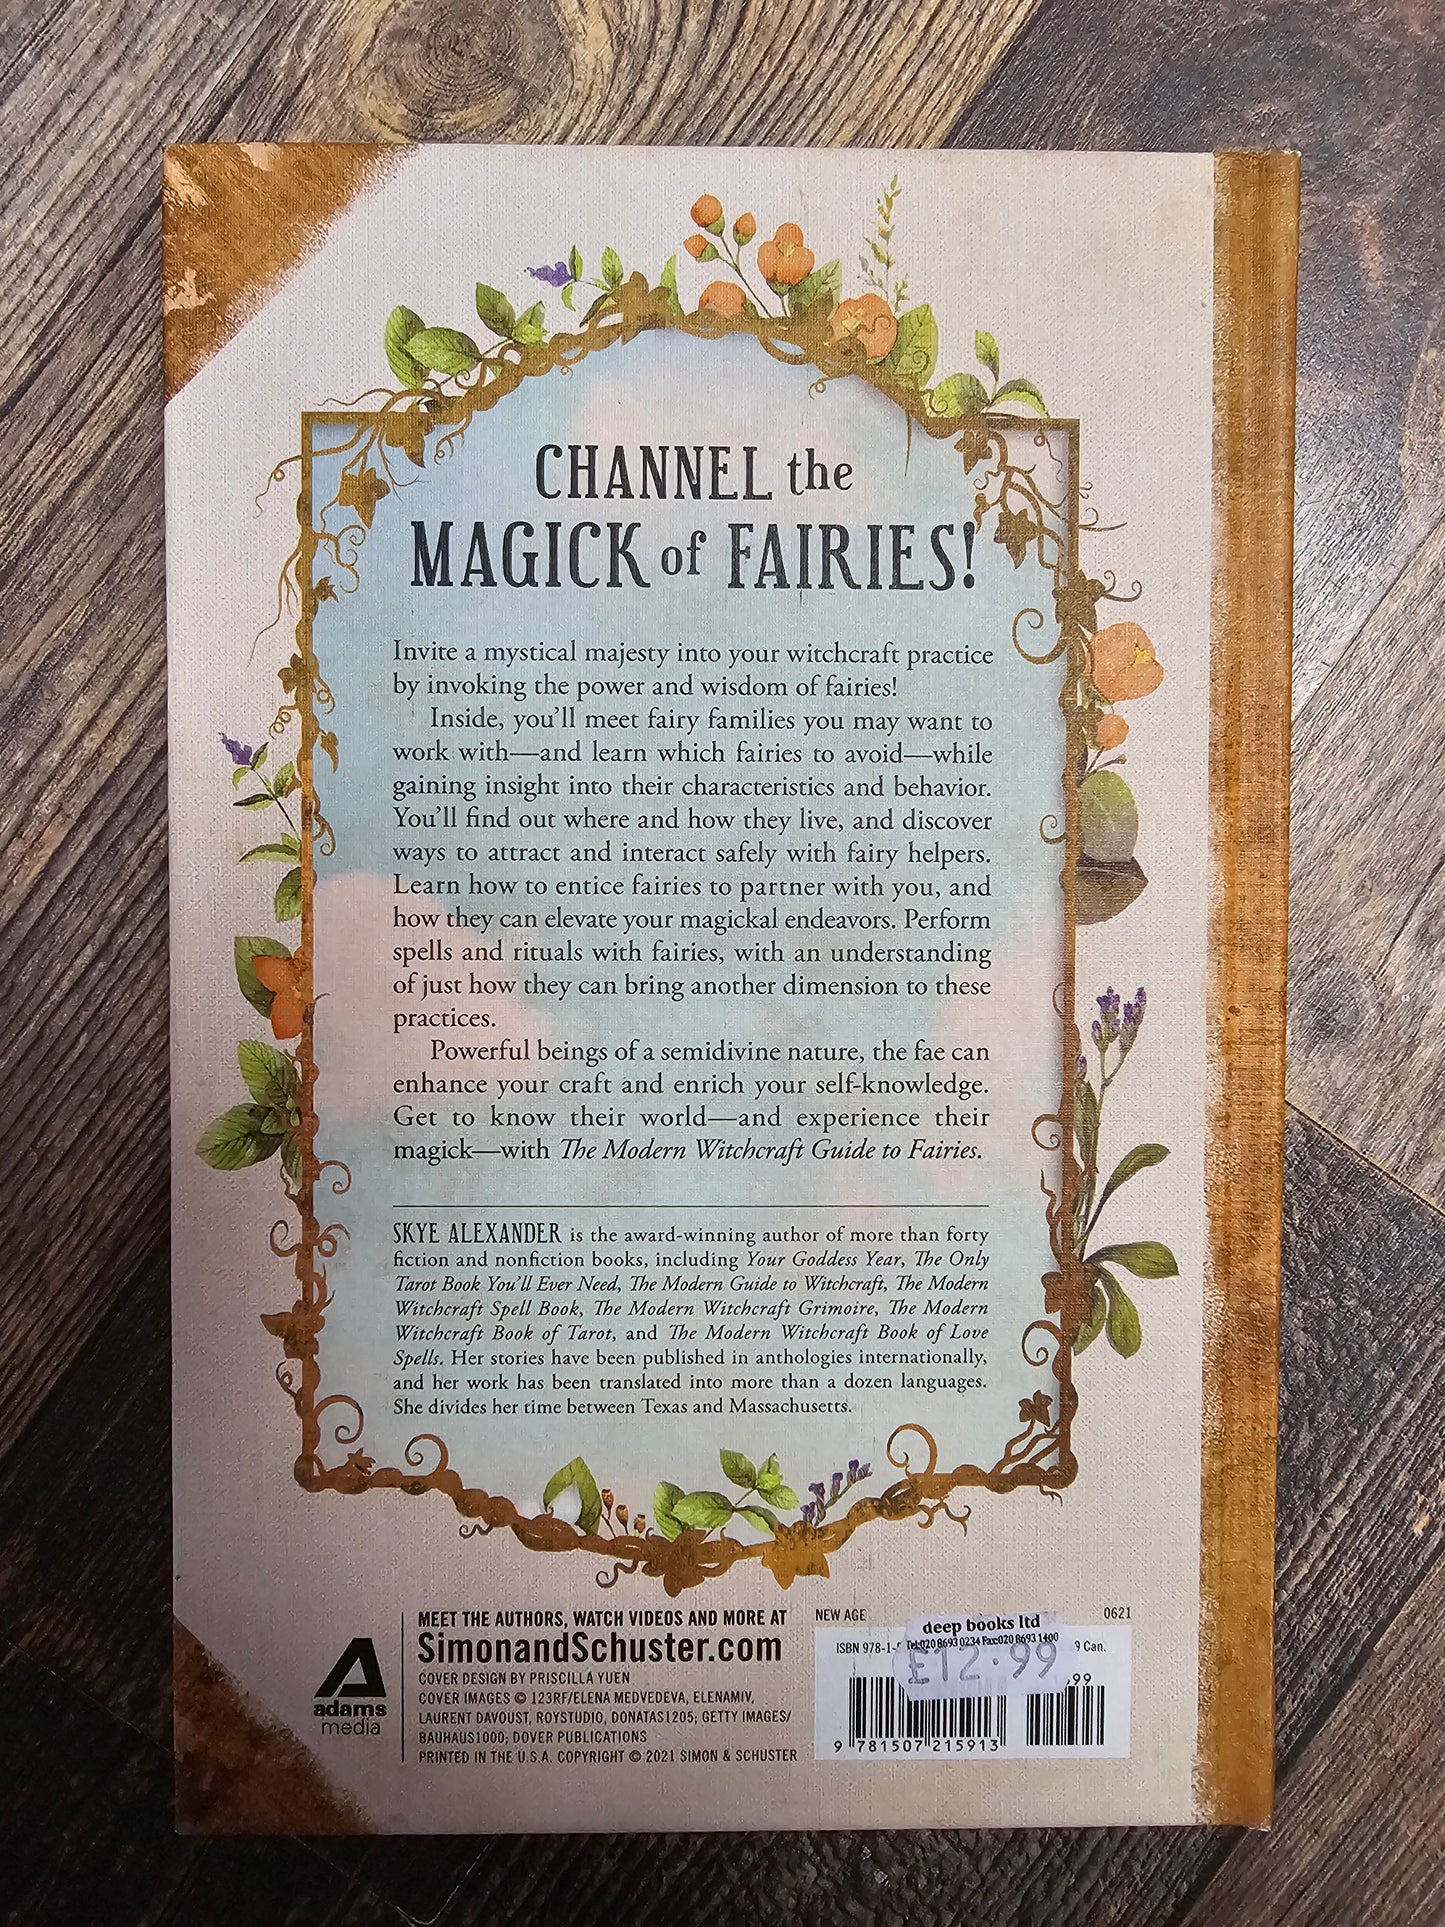 Modern Witchcraft guide to Fairies